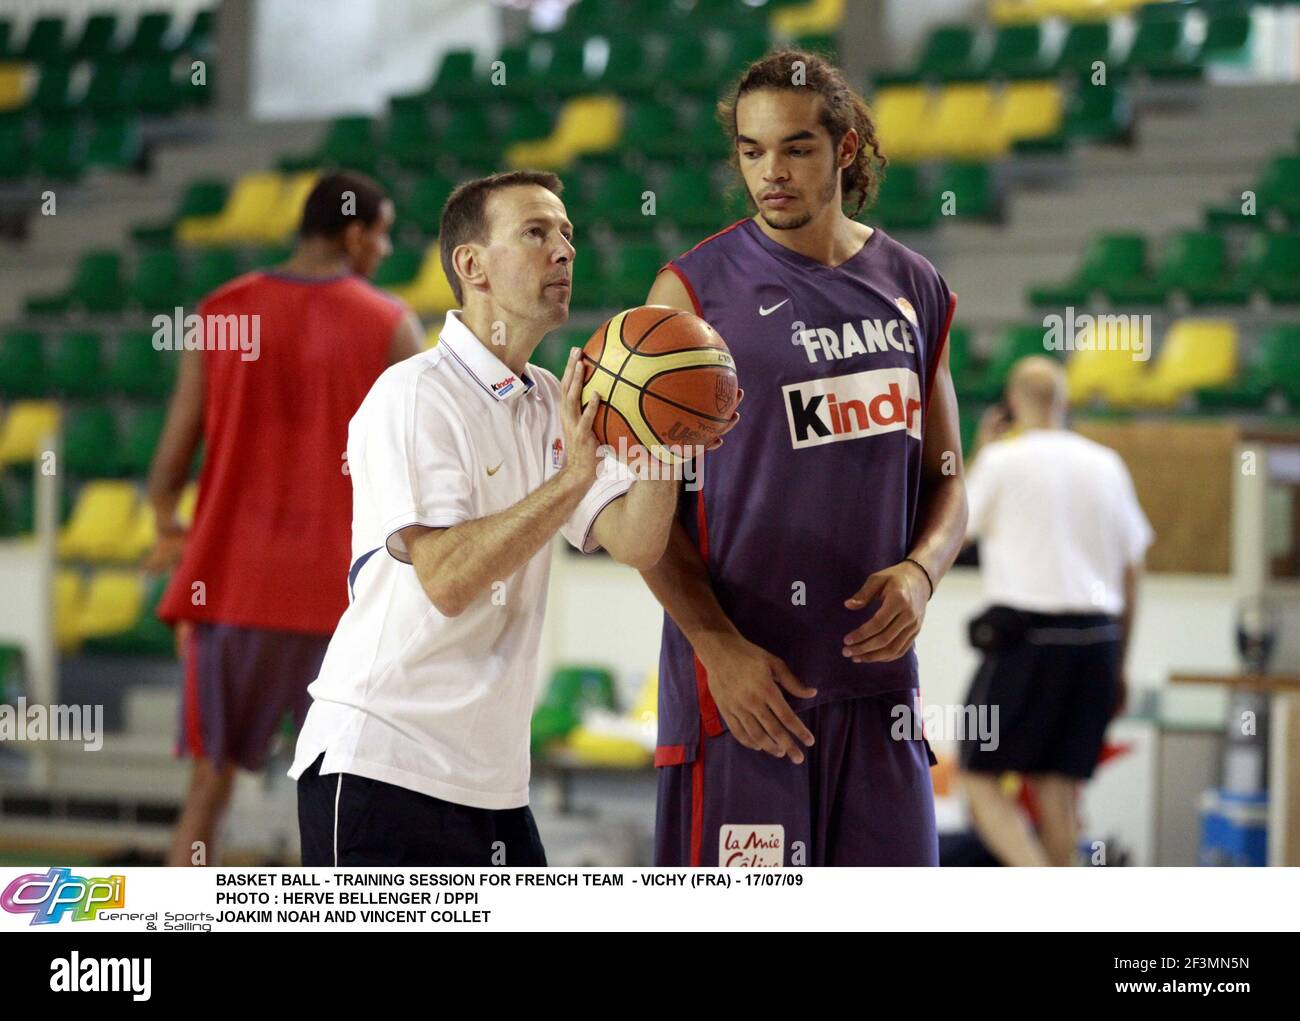 BASKET BALL - TRAINING SESSION FOR FRENCH TEAM - VICHY (FRA) -  17/07/09PHOTO : HERVE BELLENGER / DPPI JOAKIM NOAH AND VINCENT COLLET Stock  Photo - Alamy